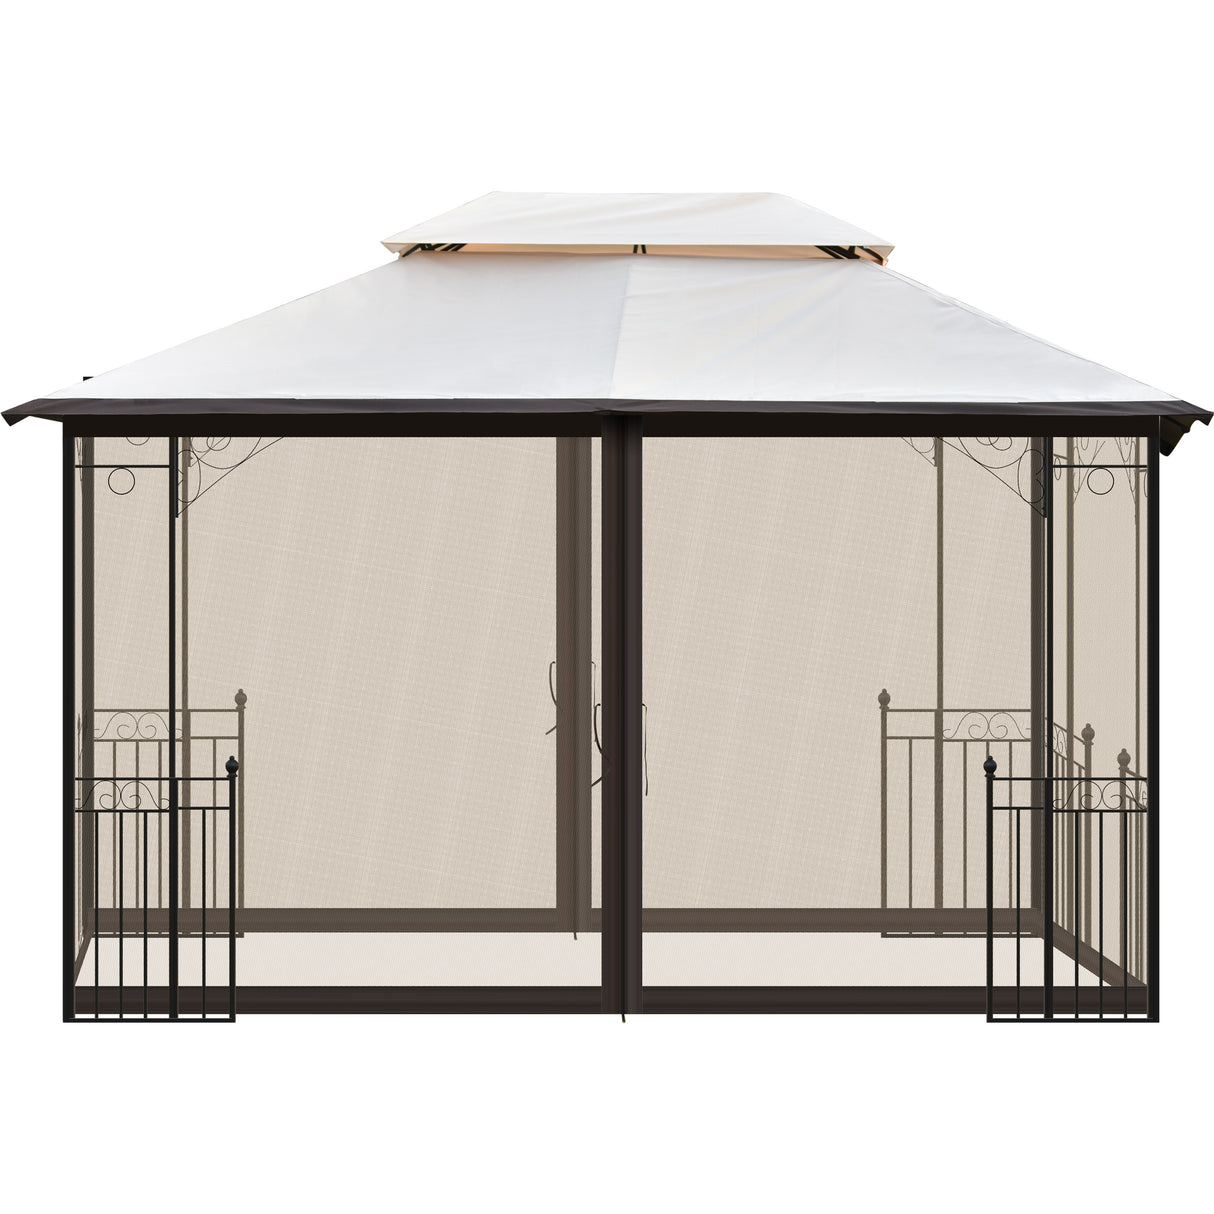 U_STYLE 13 Ft. W x 9.7 Ft. D Iron Patio Outdoor Gazebo, Double Roof Soft Canopy Garden Backyard Gazebo with Mosquito Netting Suitable for Lawn, Garden, Backyard and Deck